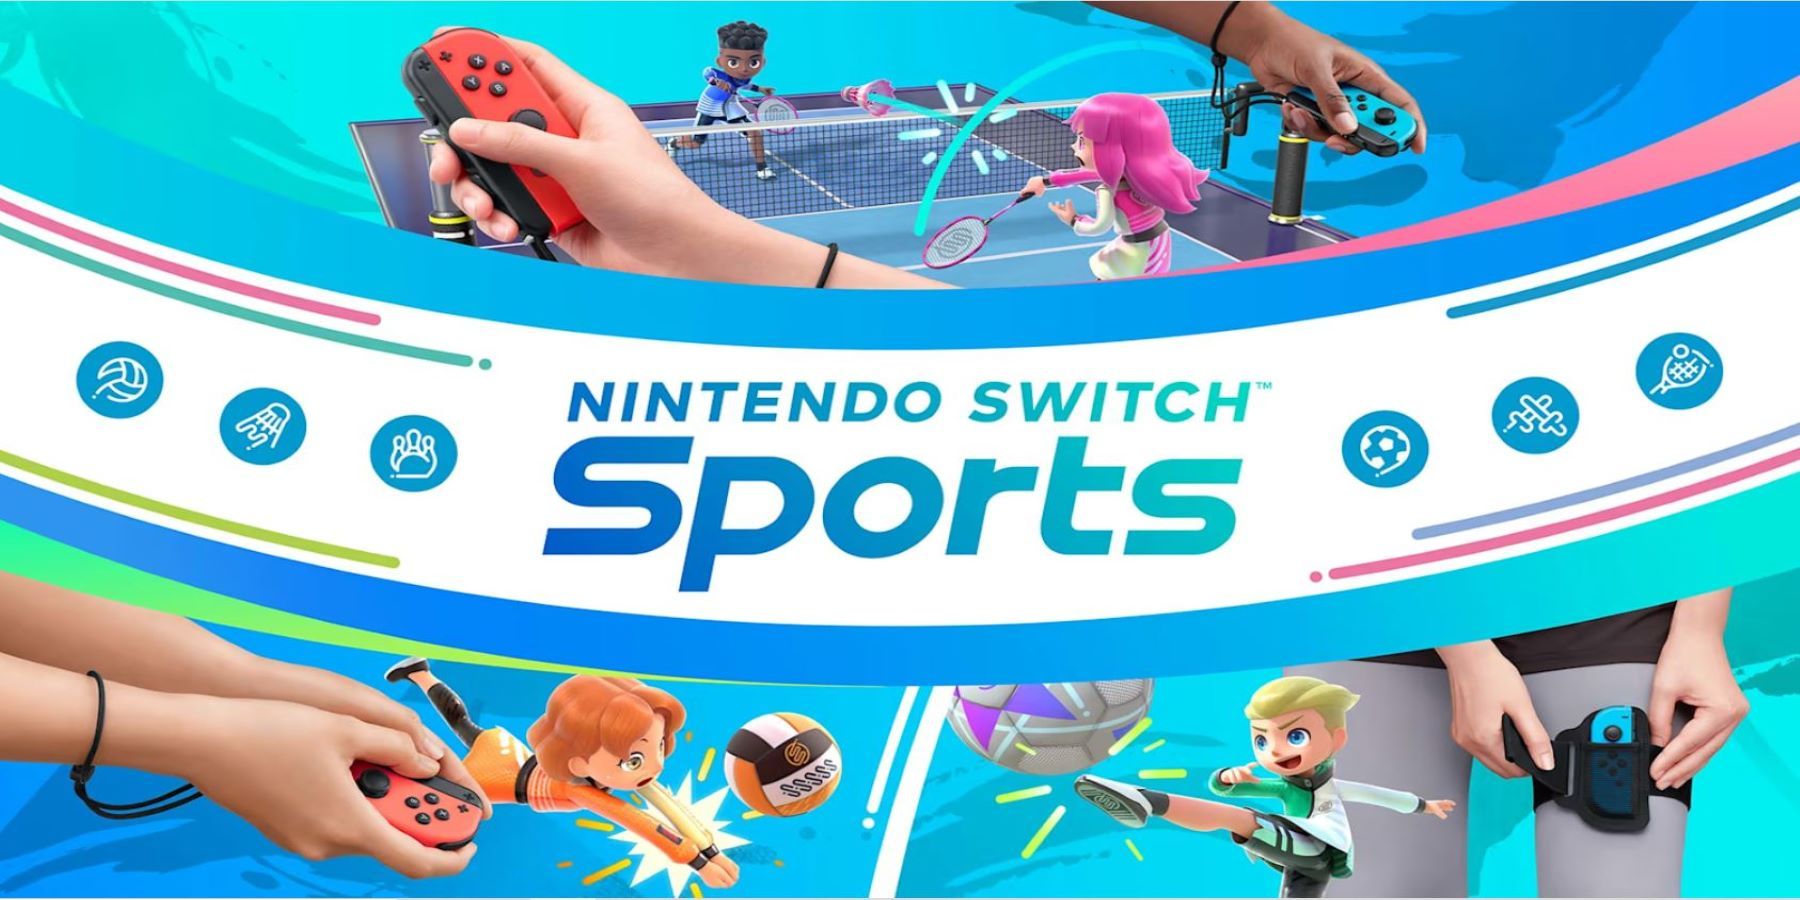 Why Wii Sports Became a Classic